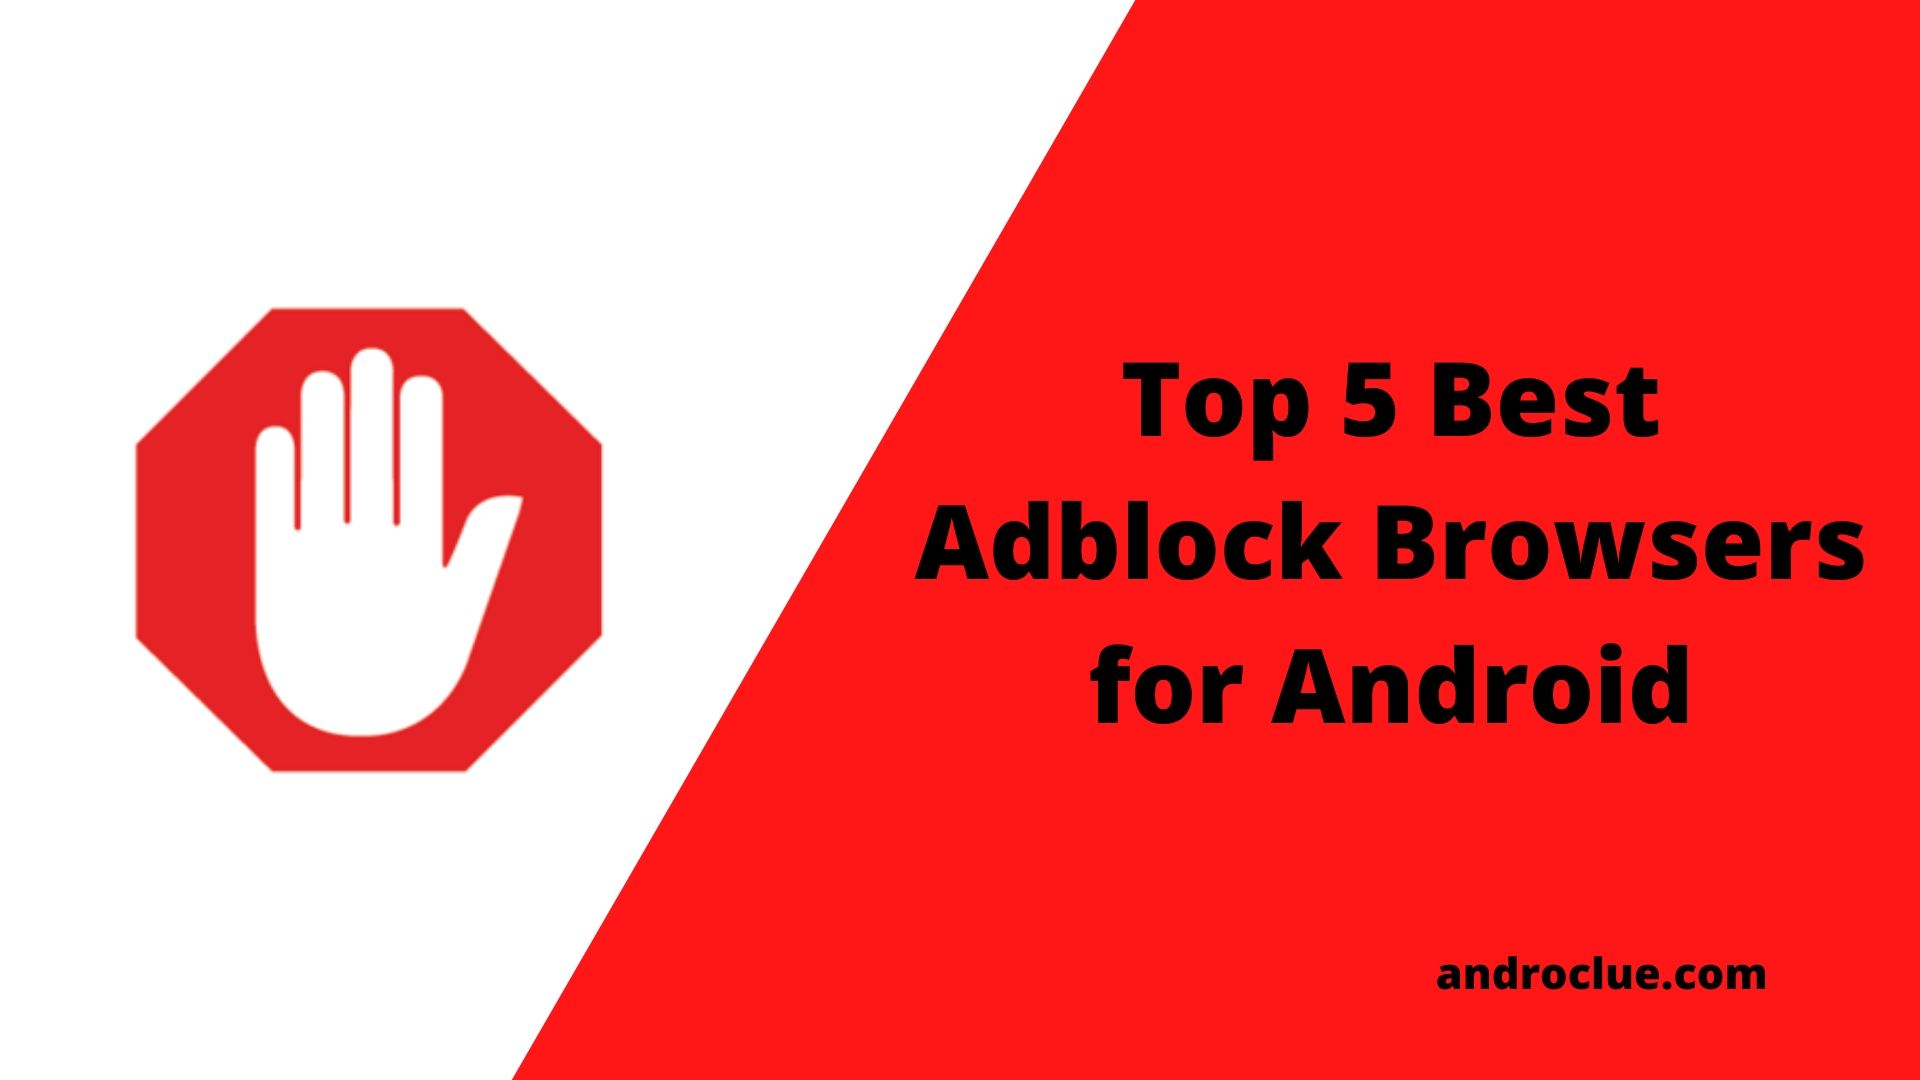 Top 5 Best Adblock Browsers to Block Ads on Android Devices (2020)